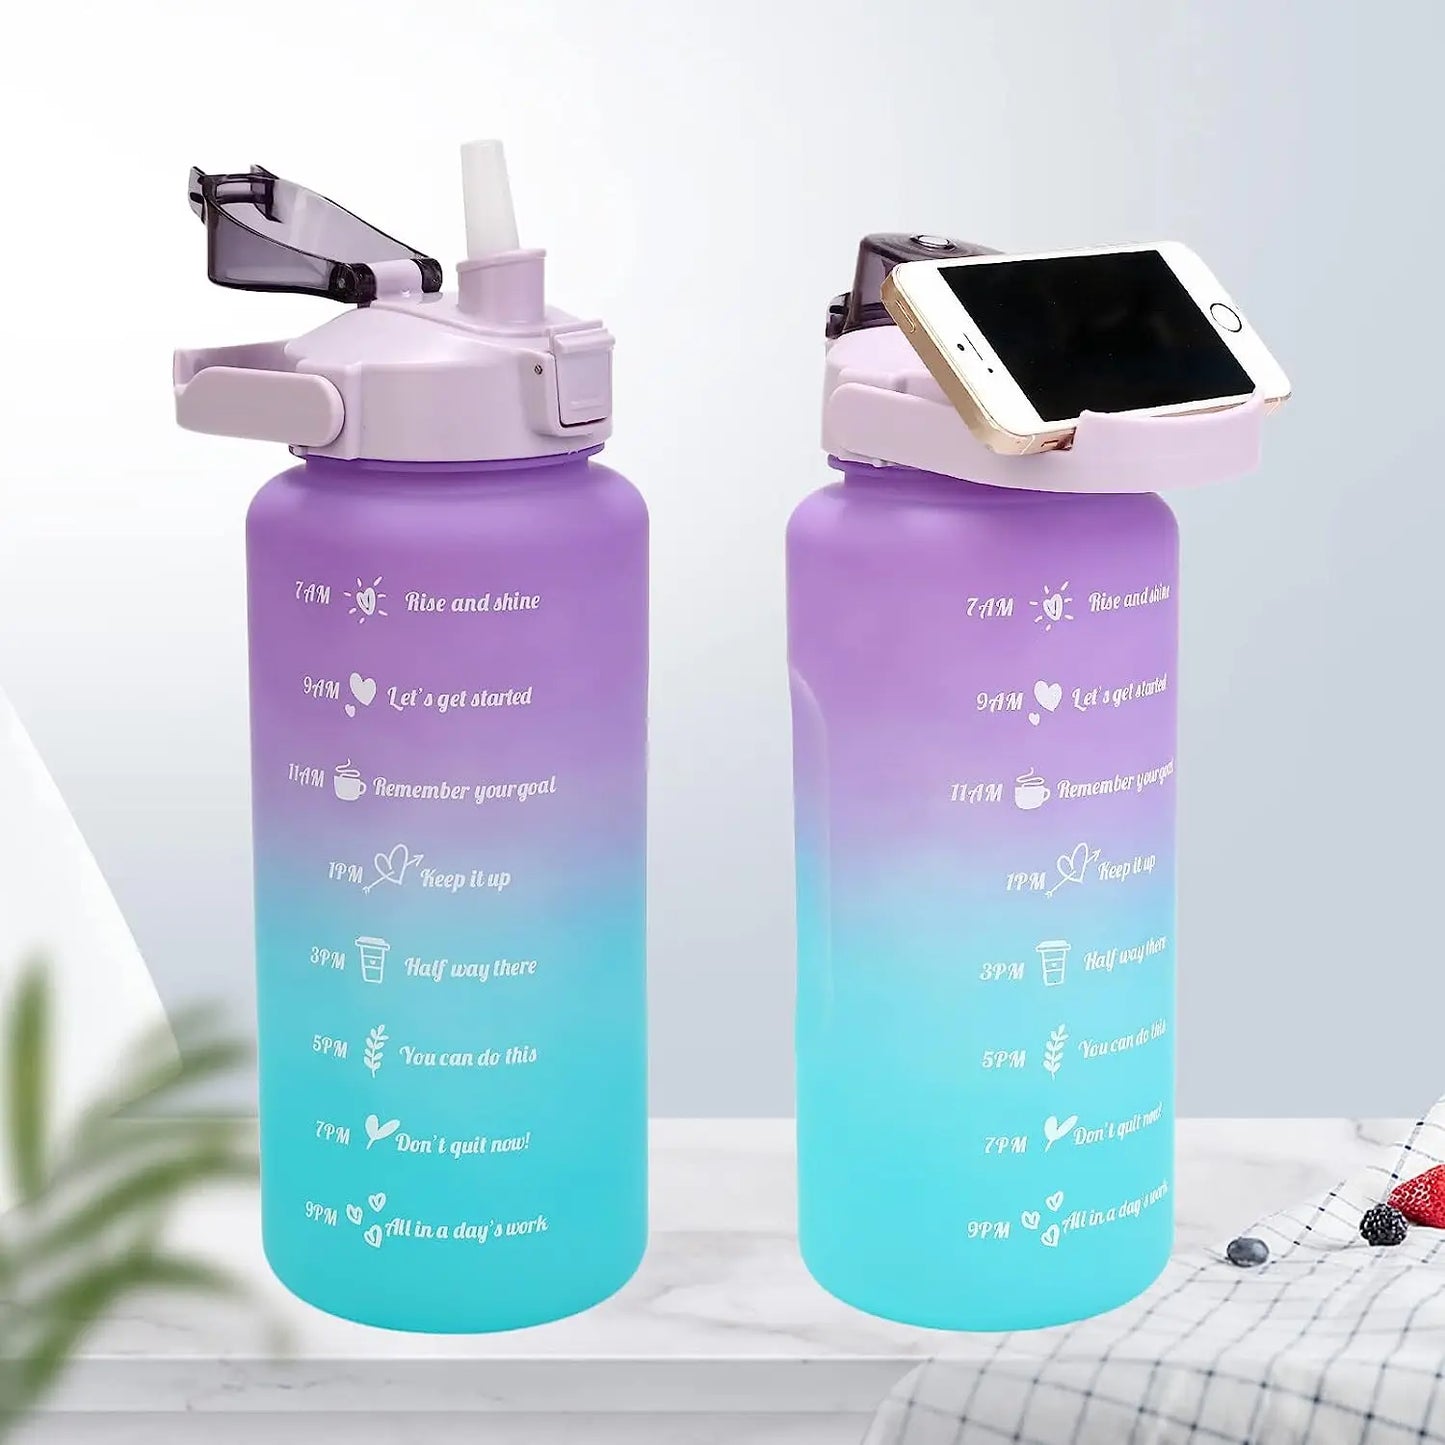 3Pcs/Set Large Capacity Water Bottle Set - Portable Plastic Frosted Gradient Color Water Bottle with Time Marker and Hanging Rope